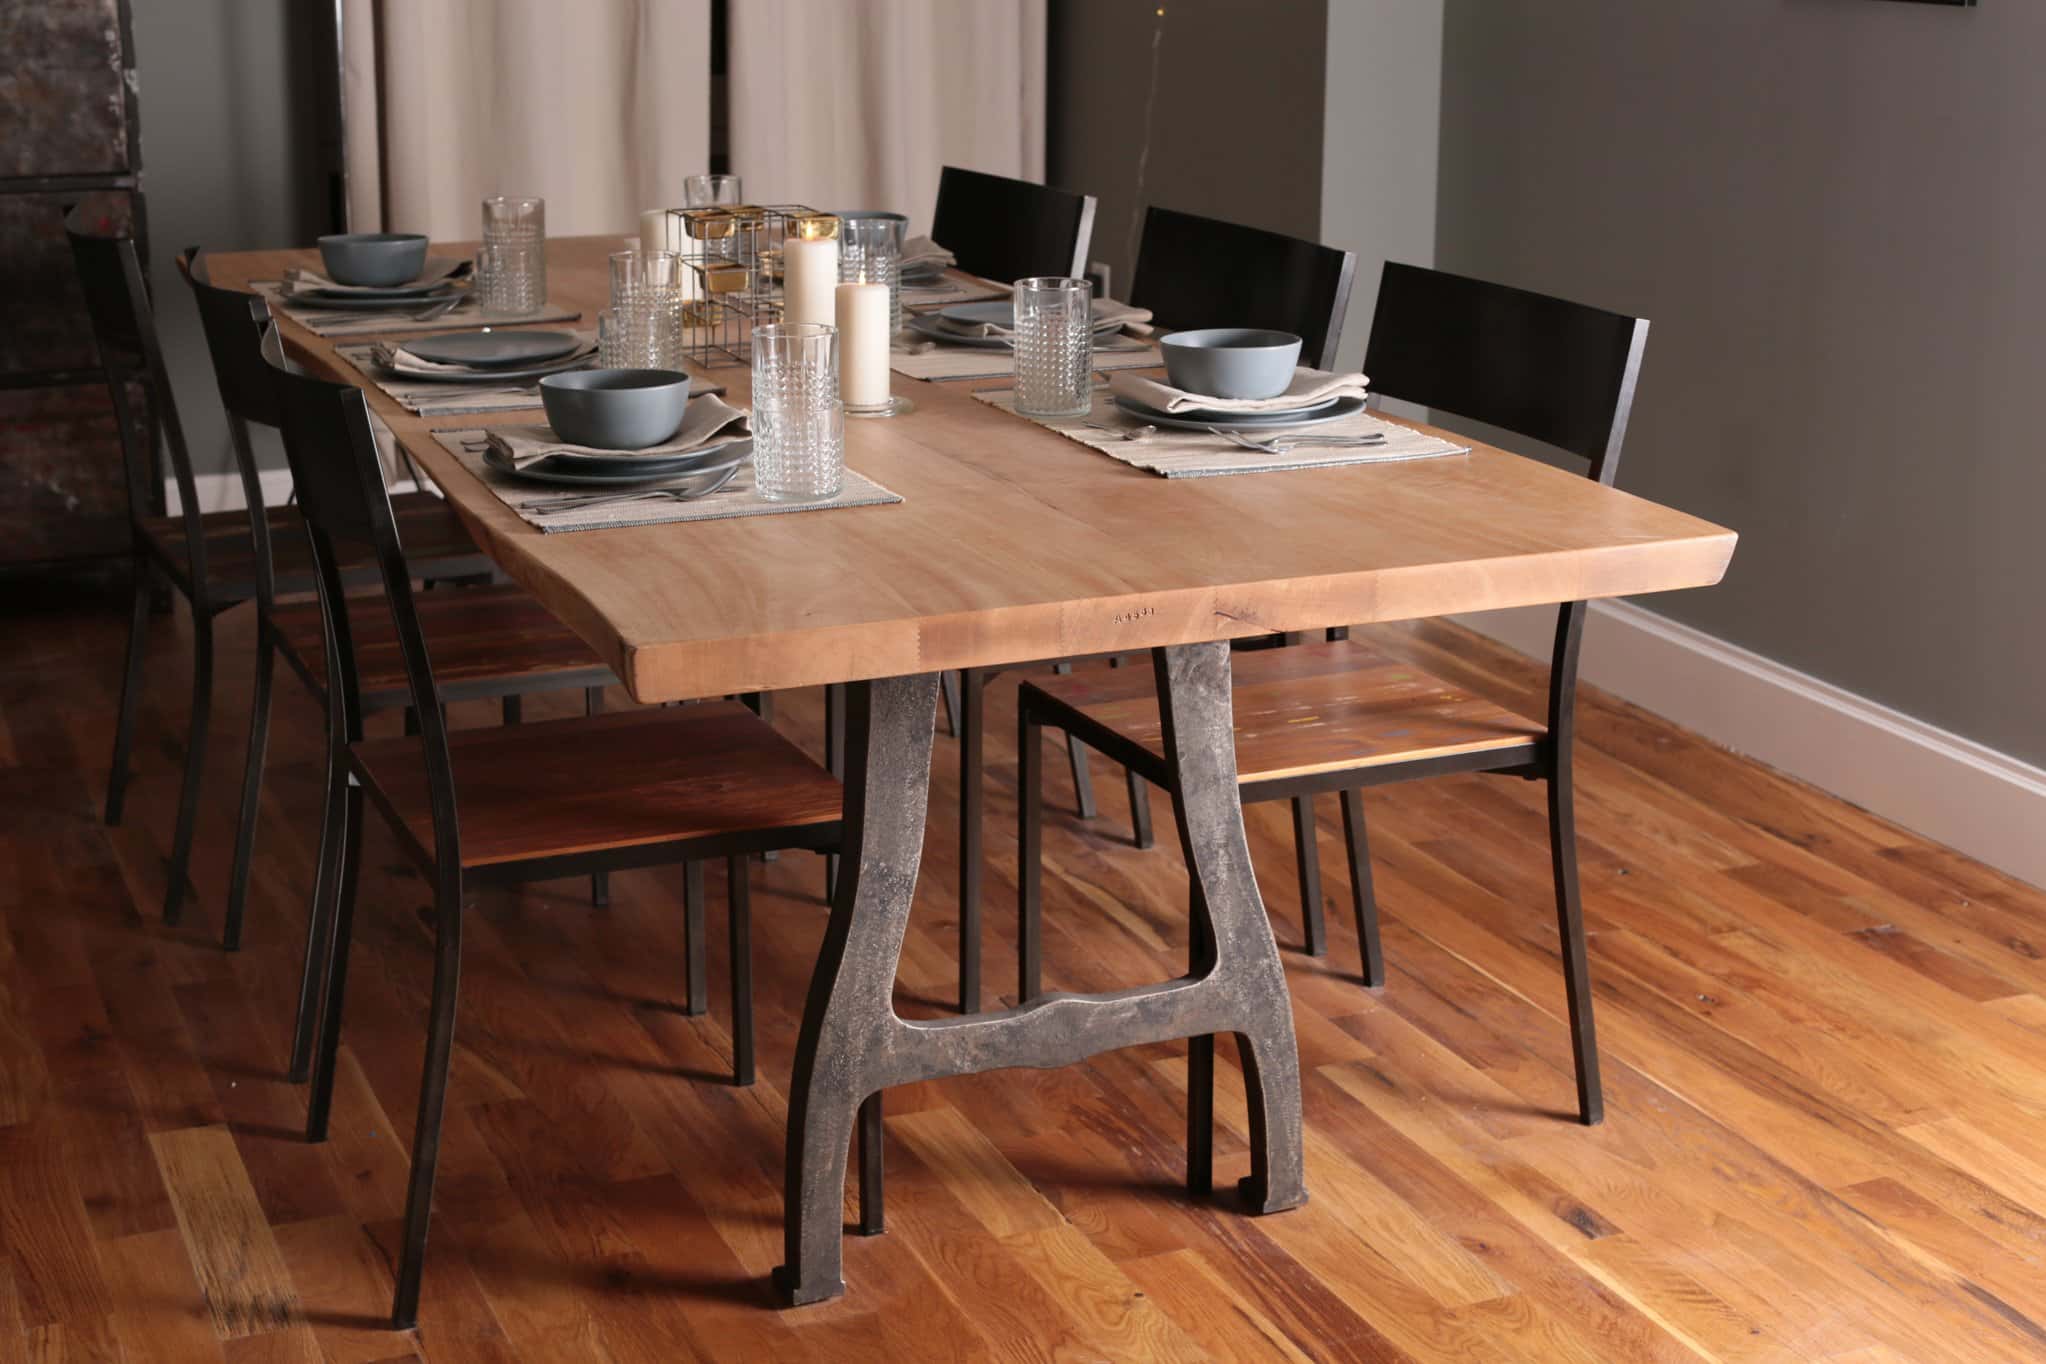 anklageren fattige Sober Kali Dining Table Top - Mango Wood/Natural Finish (96" x 39") by From the  Source